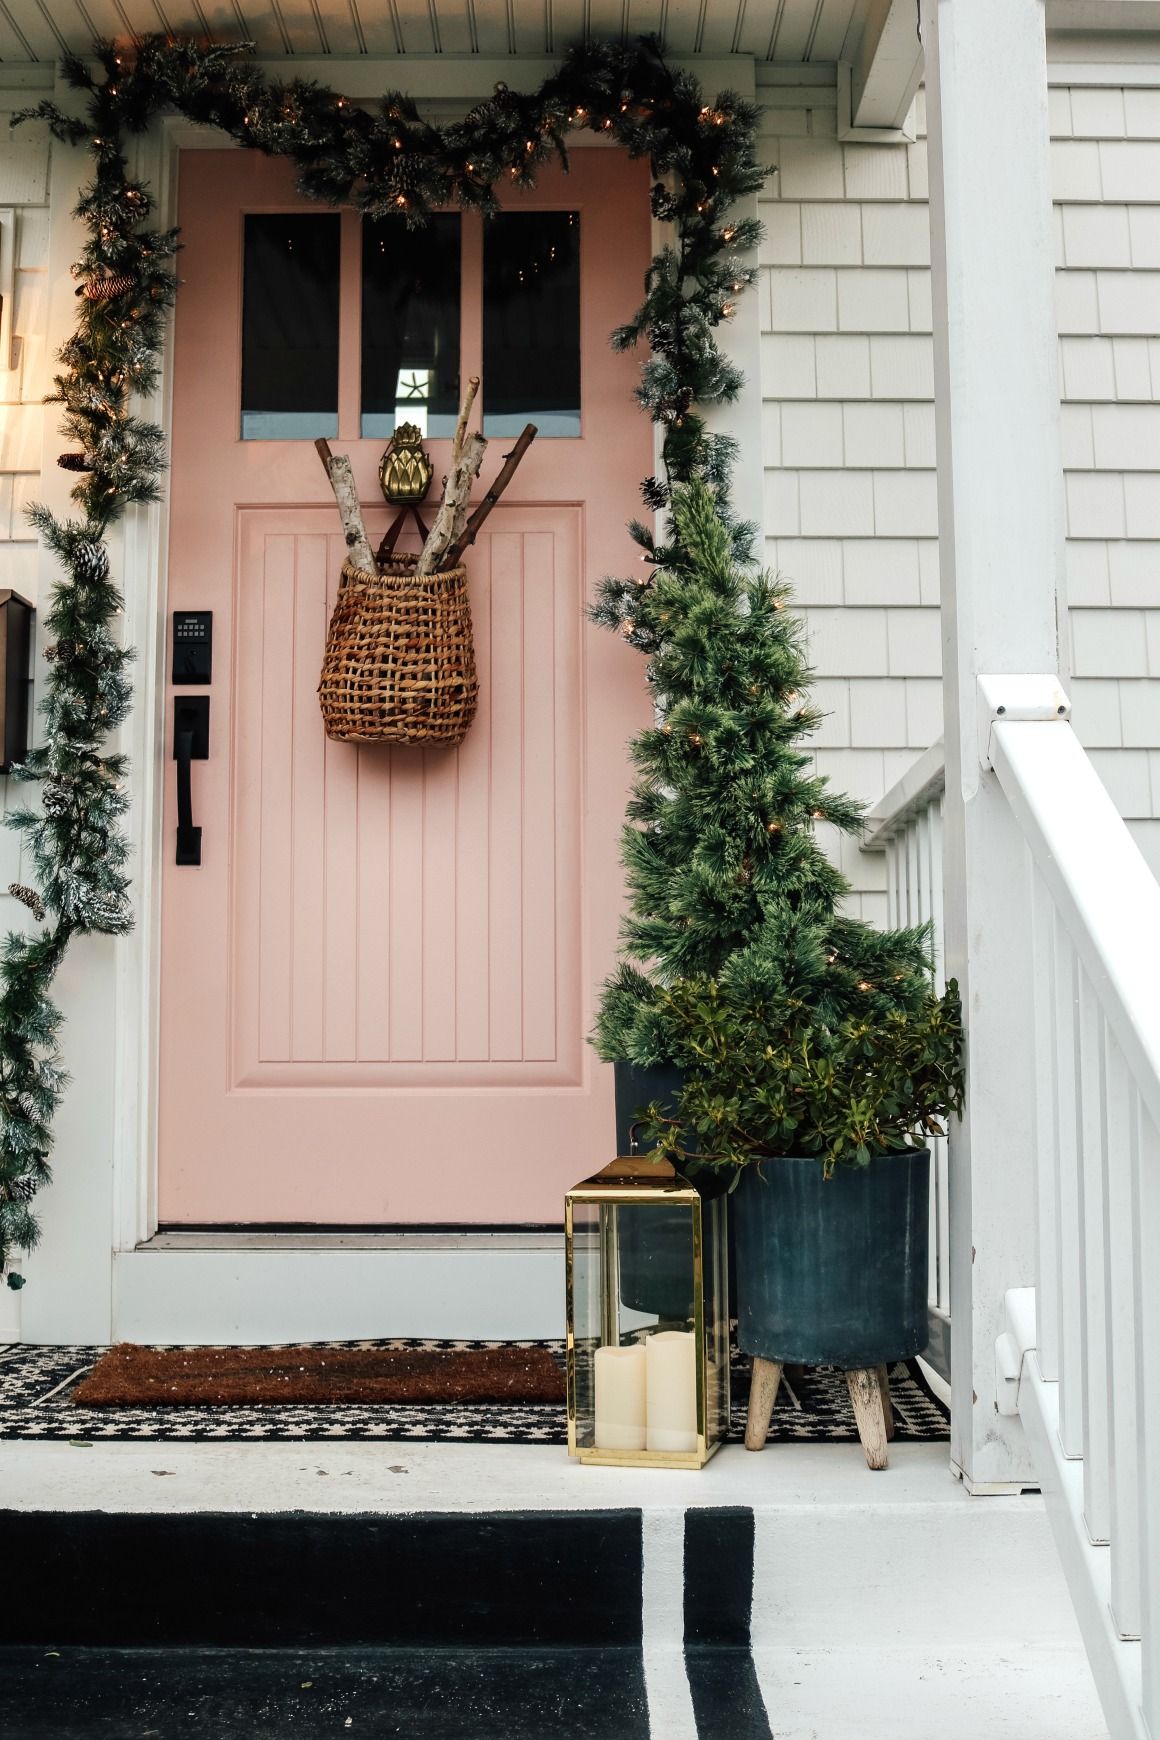 How to Create a Wintry Front Door Basket for Christmas